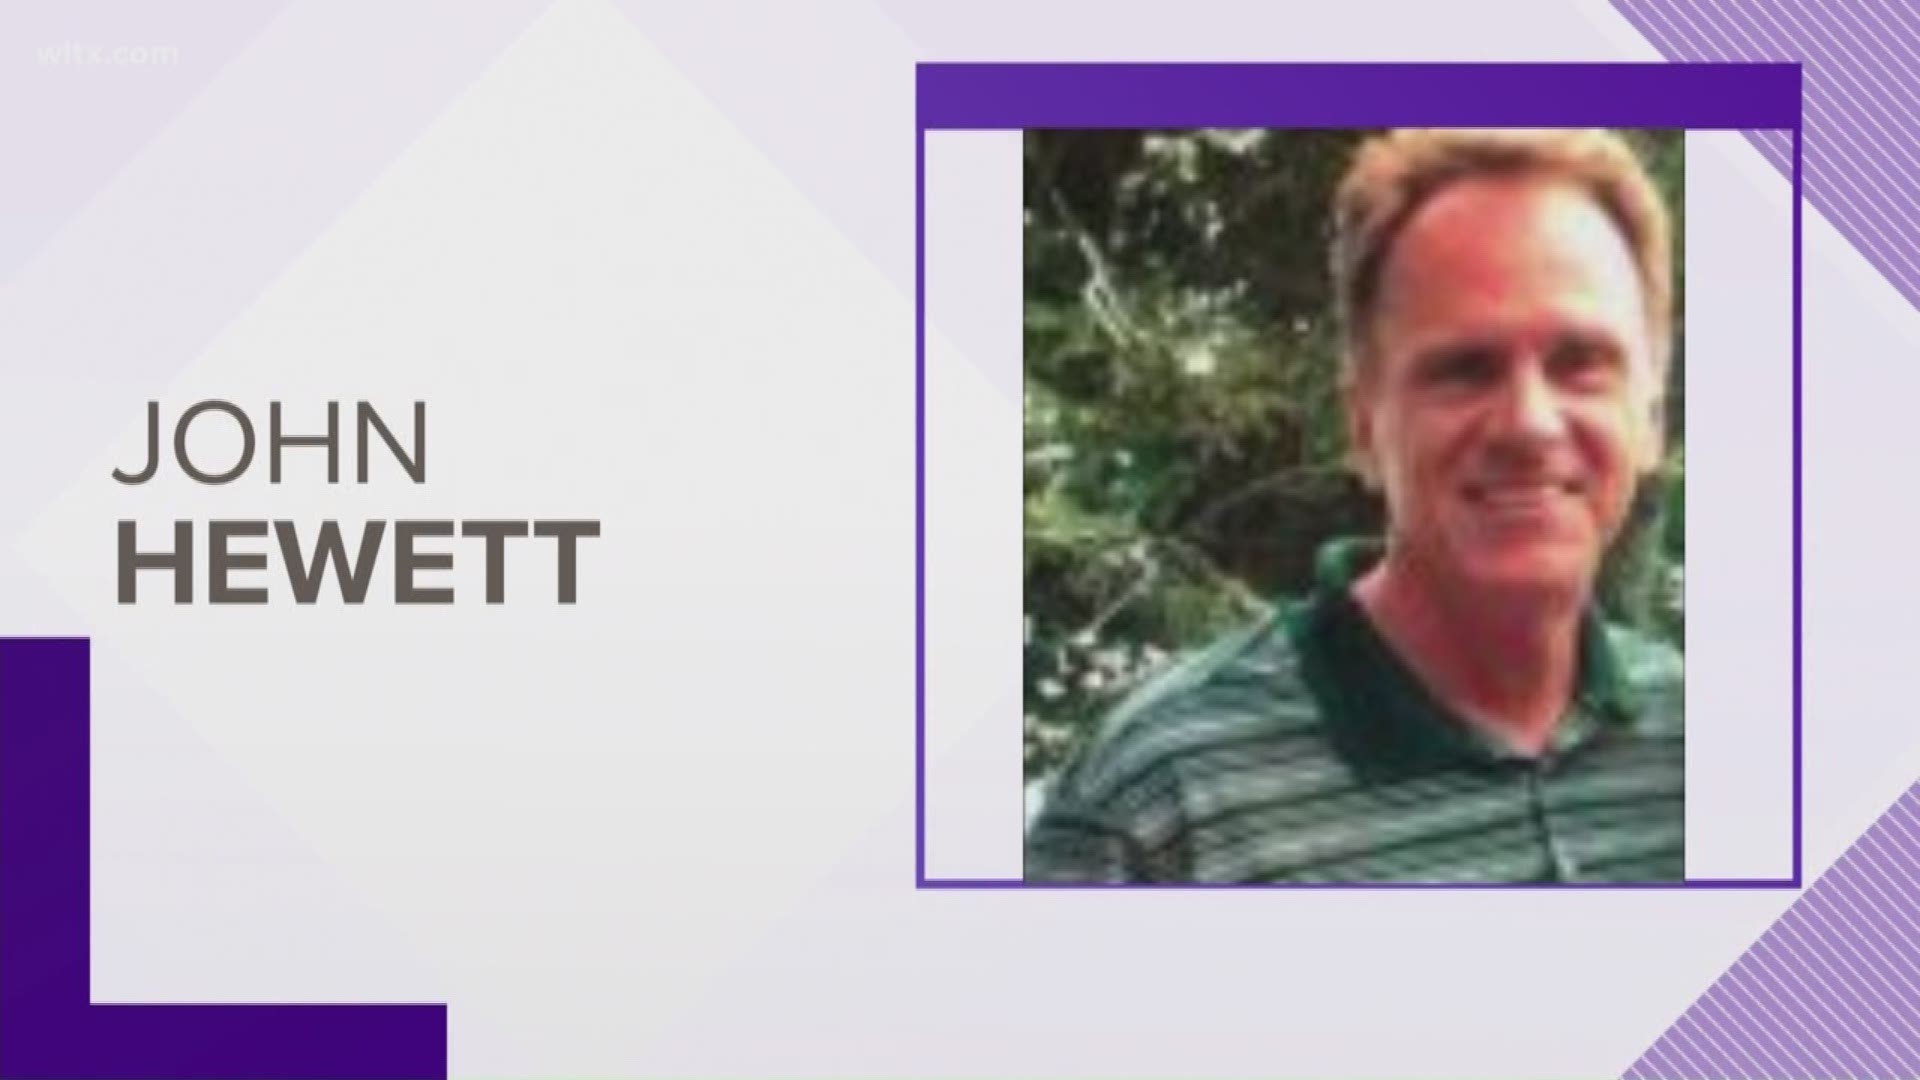 John Hewett, 62, was reported missing Thursday after he didn't come home from work. He was last seen at his home on Gadsen Street, and hasn't been heard from or seen since.